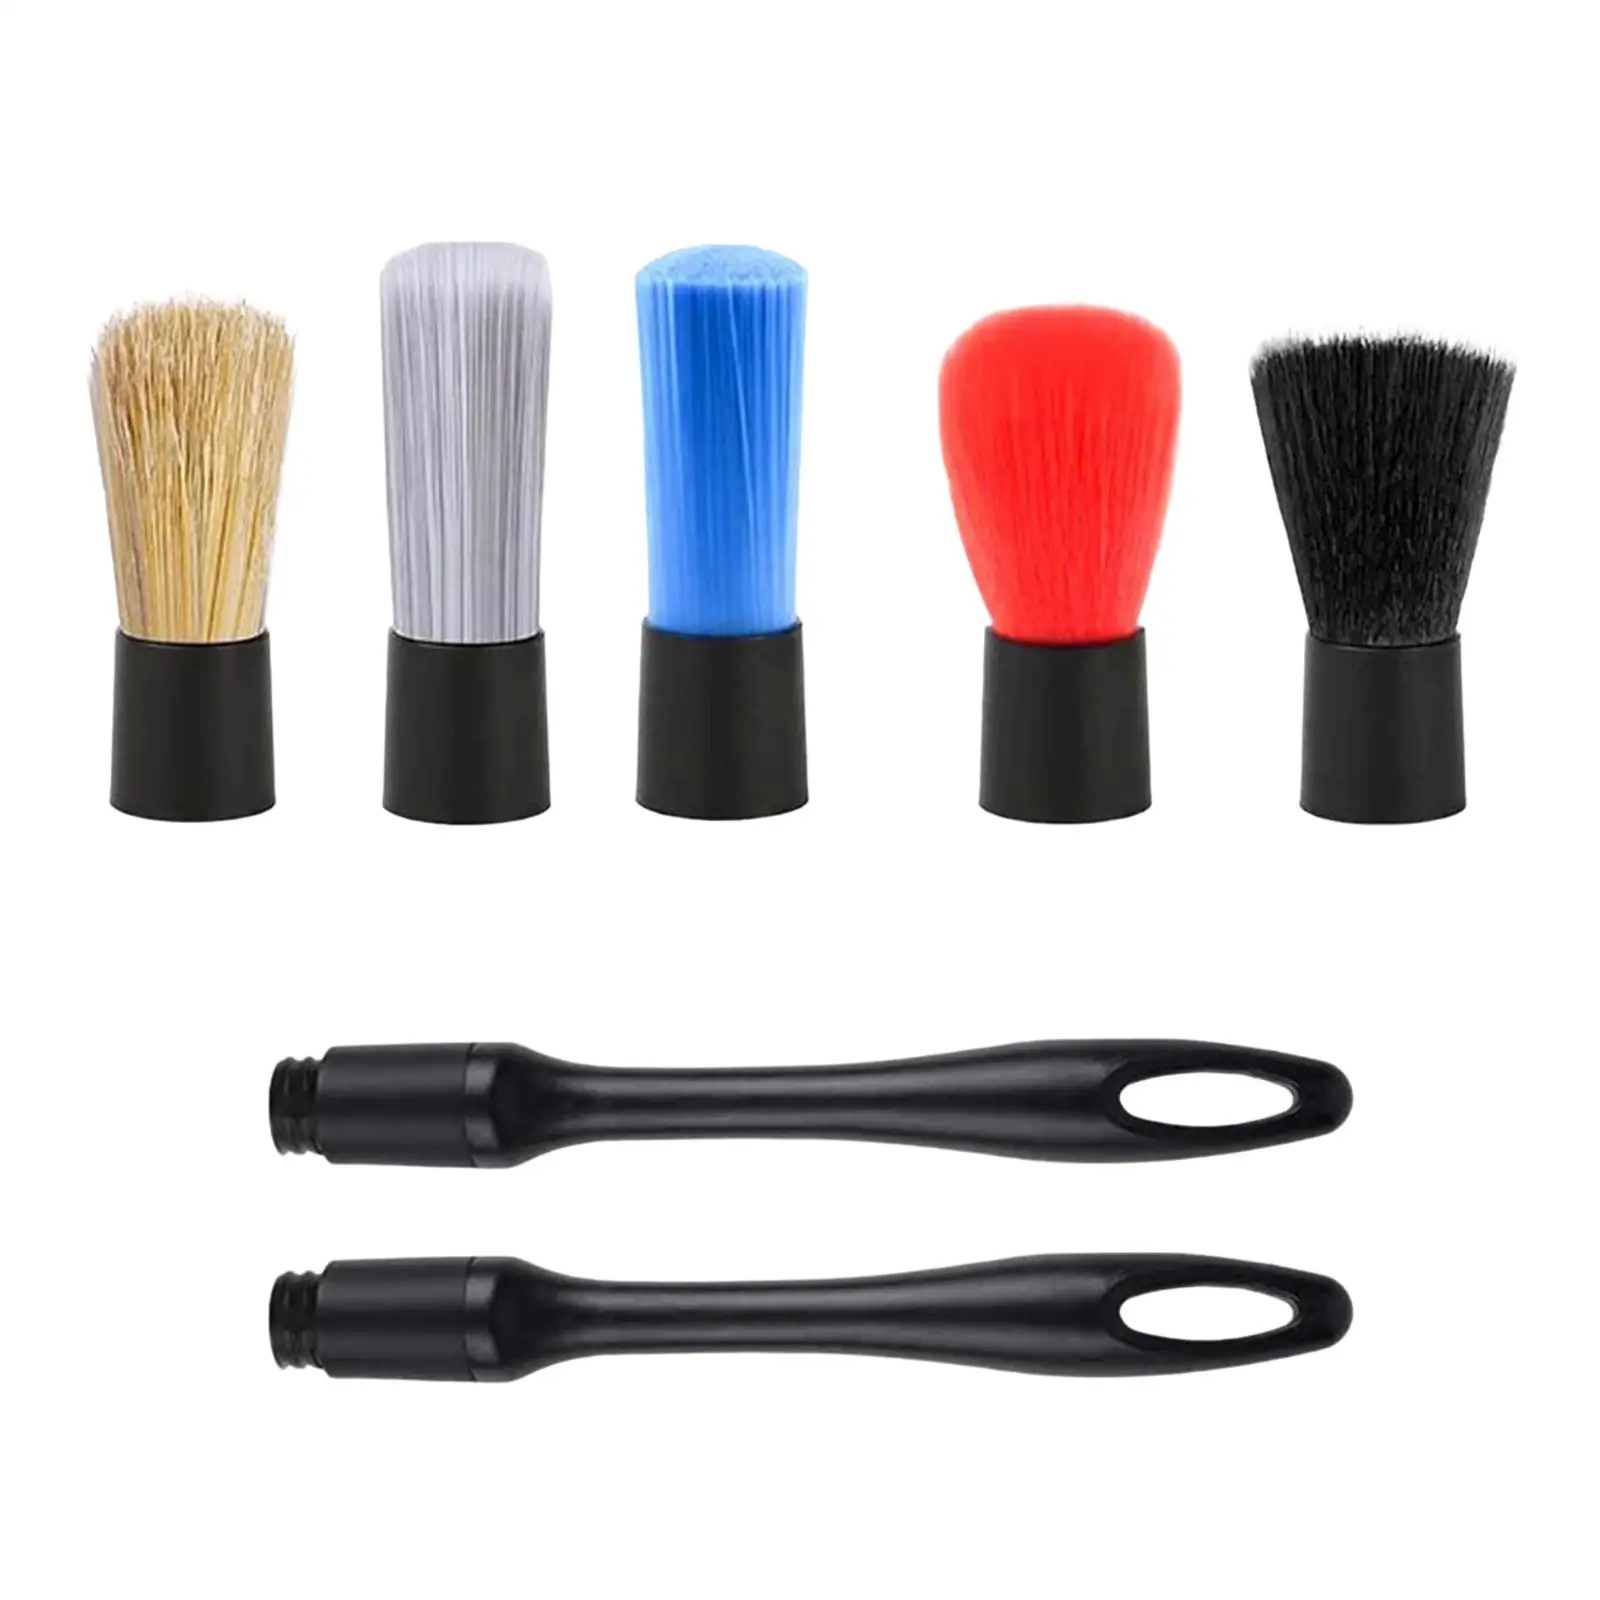 Auto Detailing Brush Set Cleaning Tools Durable Wet and Dry Use for Cleaning Interior Exterior Washing Air Vents Dashboard